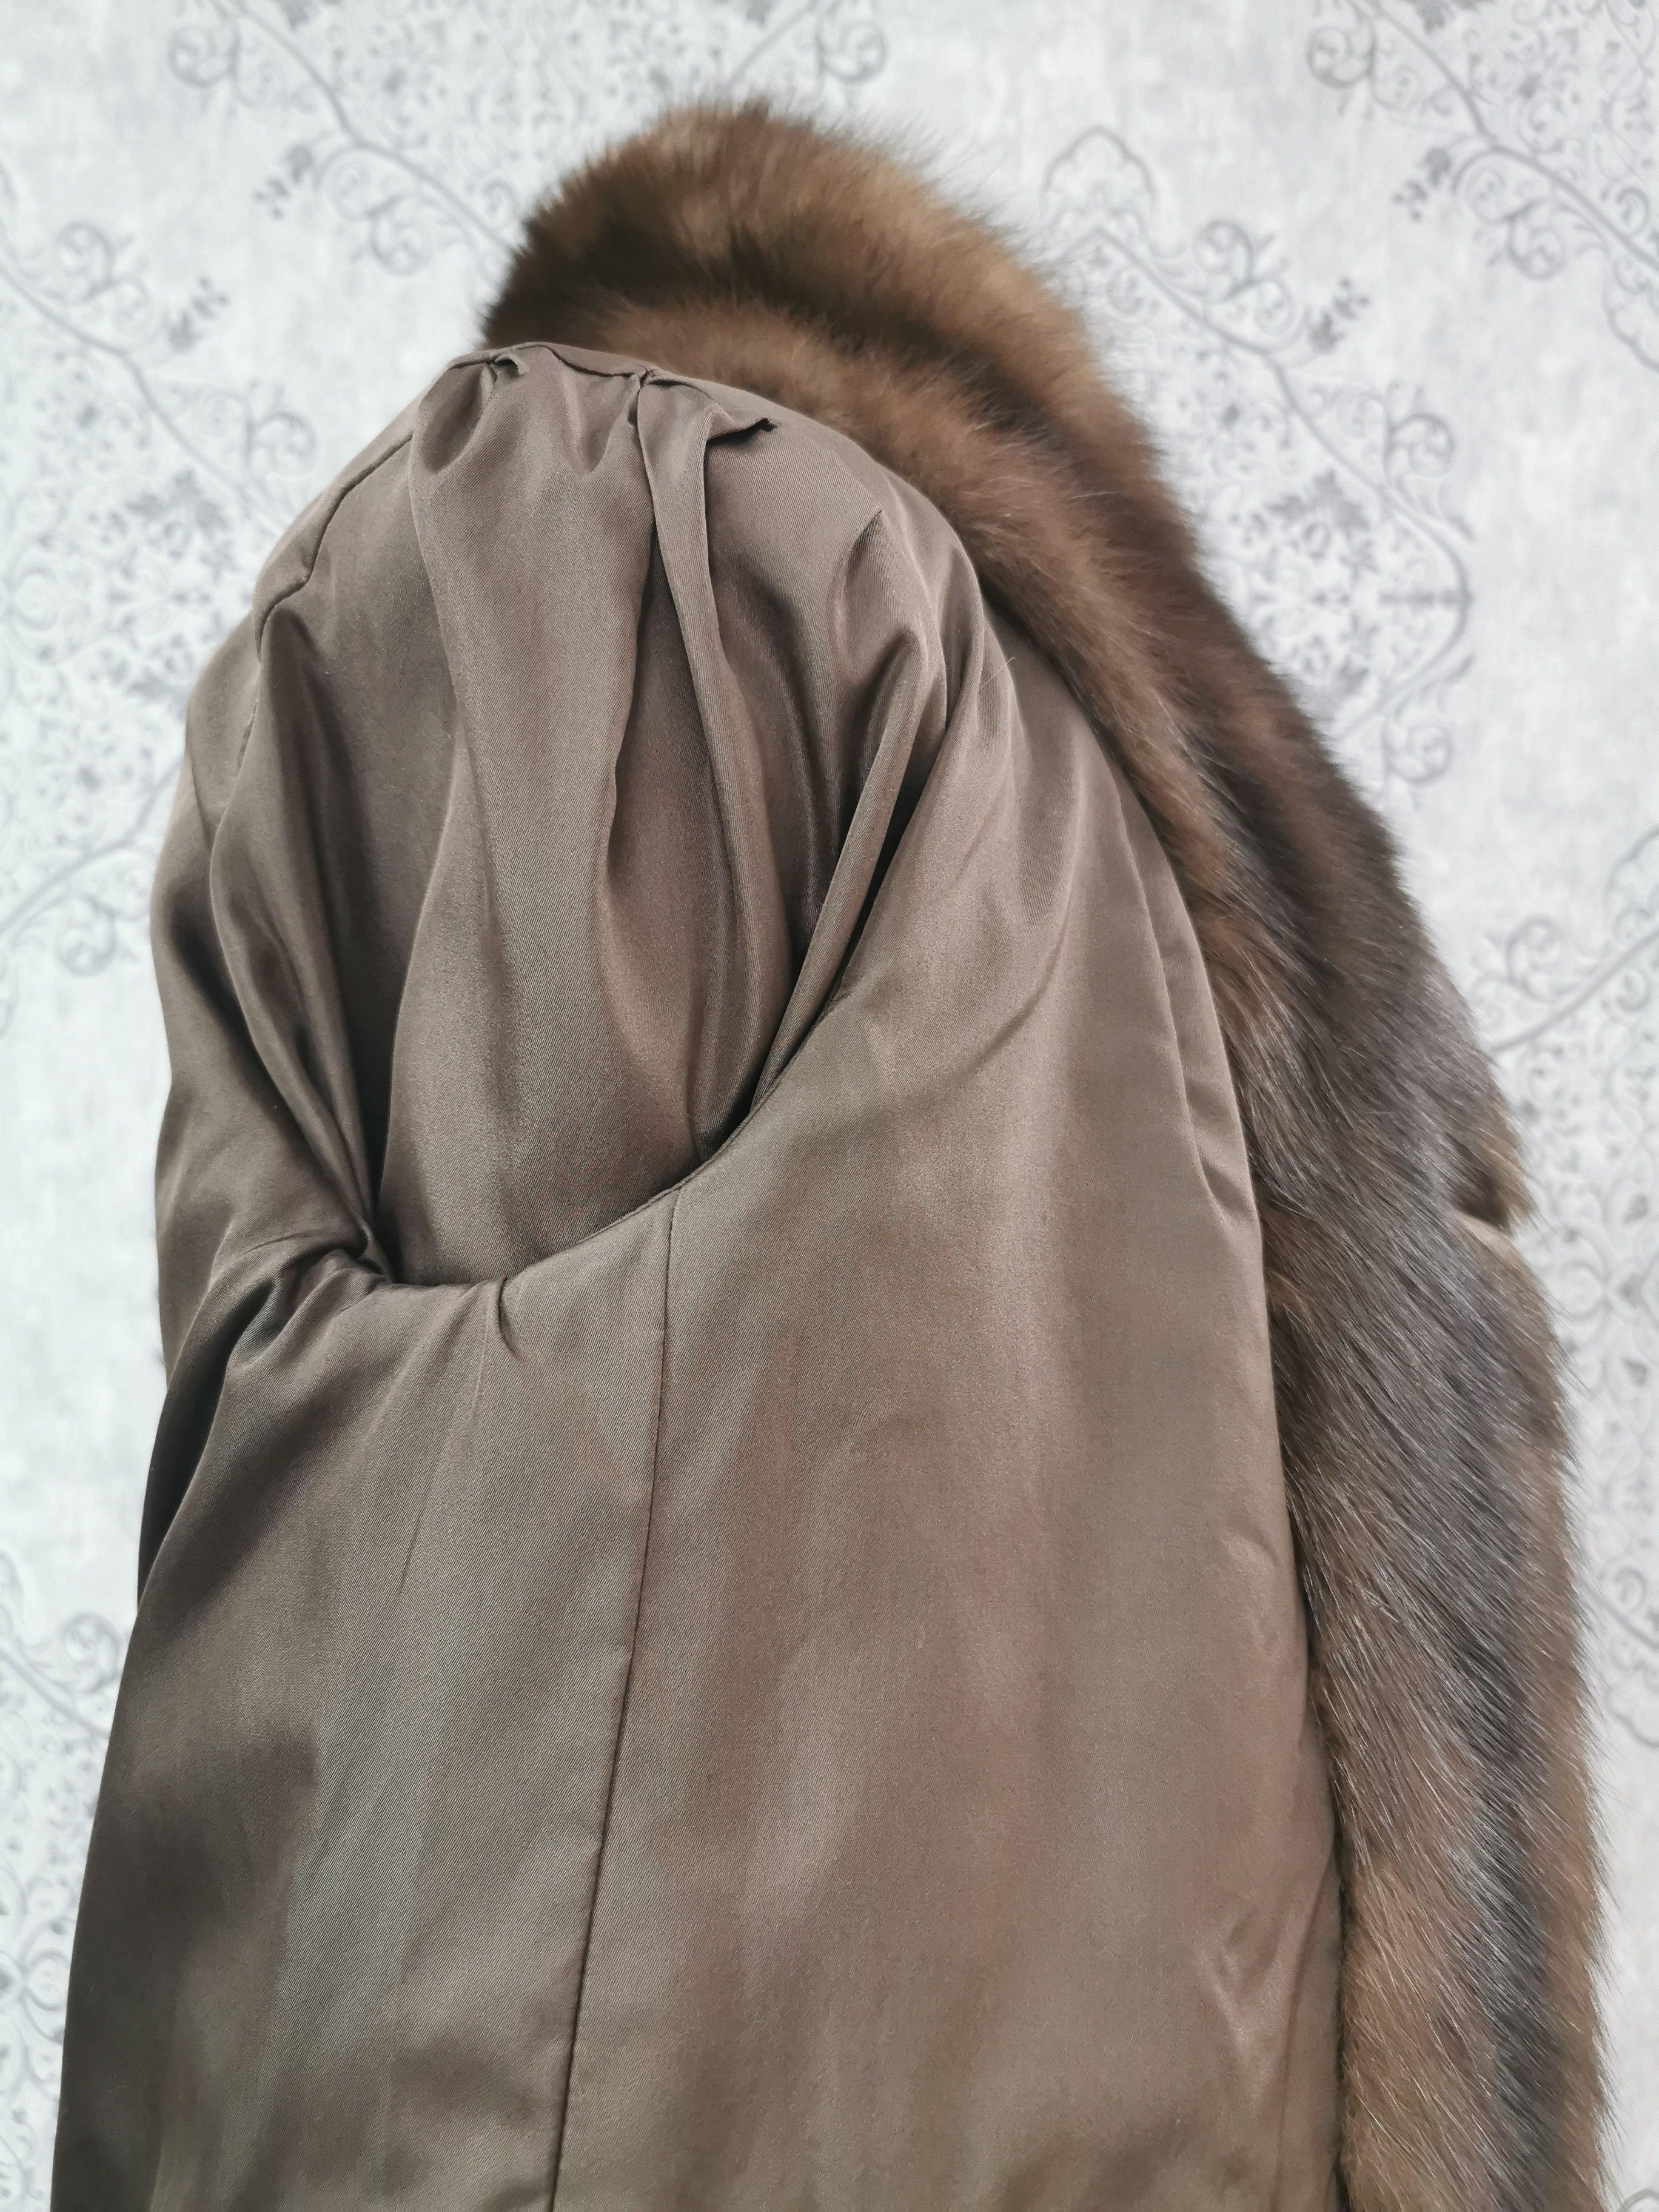 Women's Russian sable Fur Jacket (Size 6 - Small) For Sale